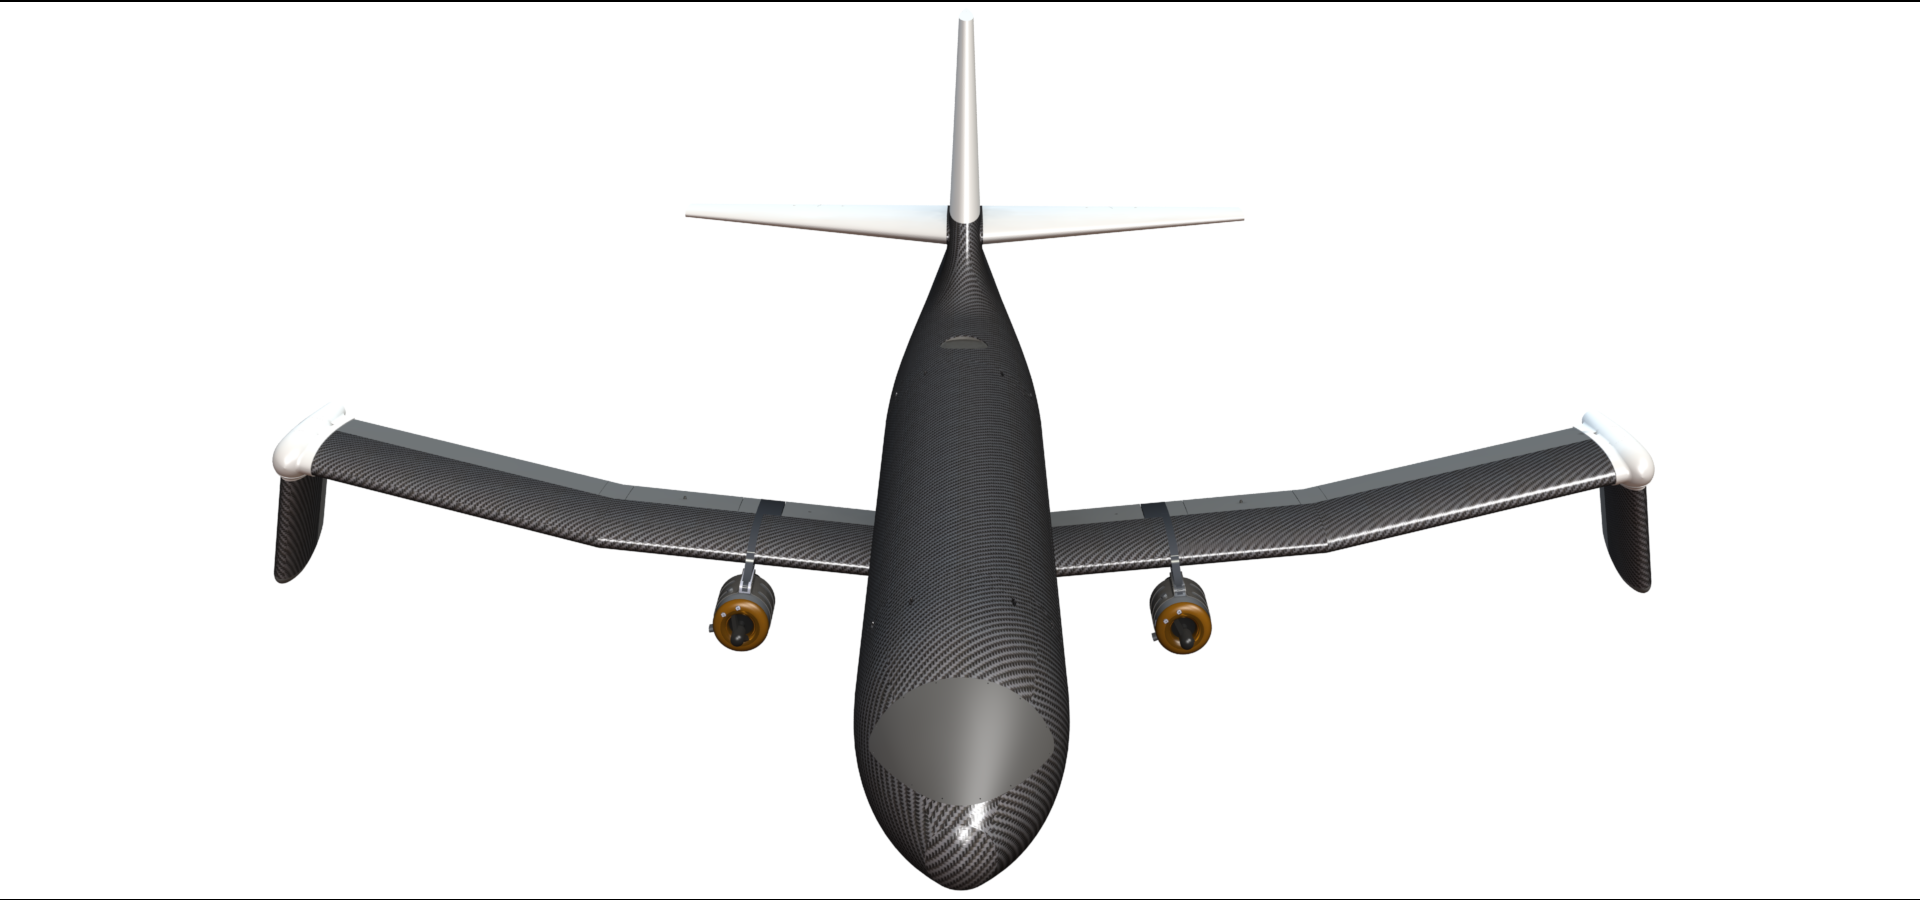 The Spanwise Adaptive Wing concept seeks to enhance aircraft performance through allowing the outboard portions of wings to adap